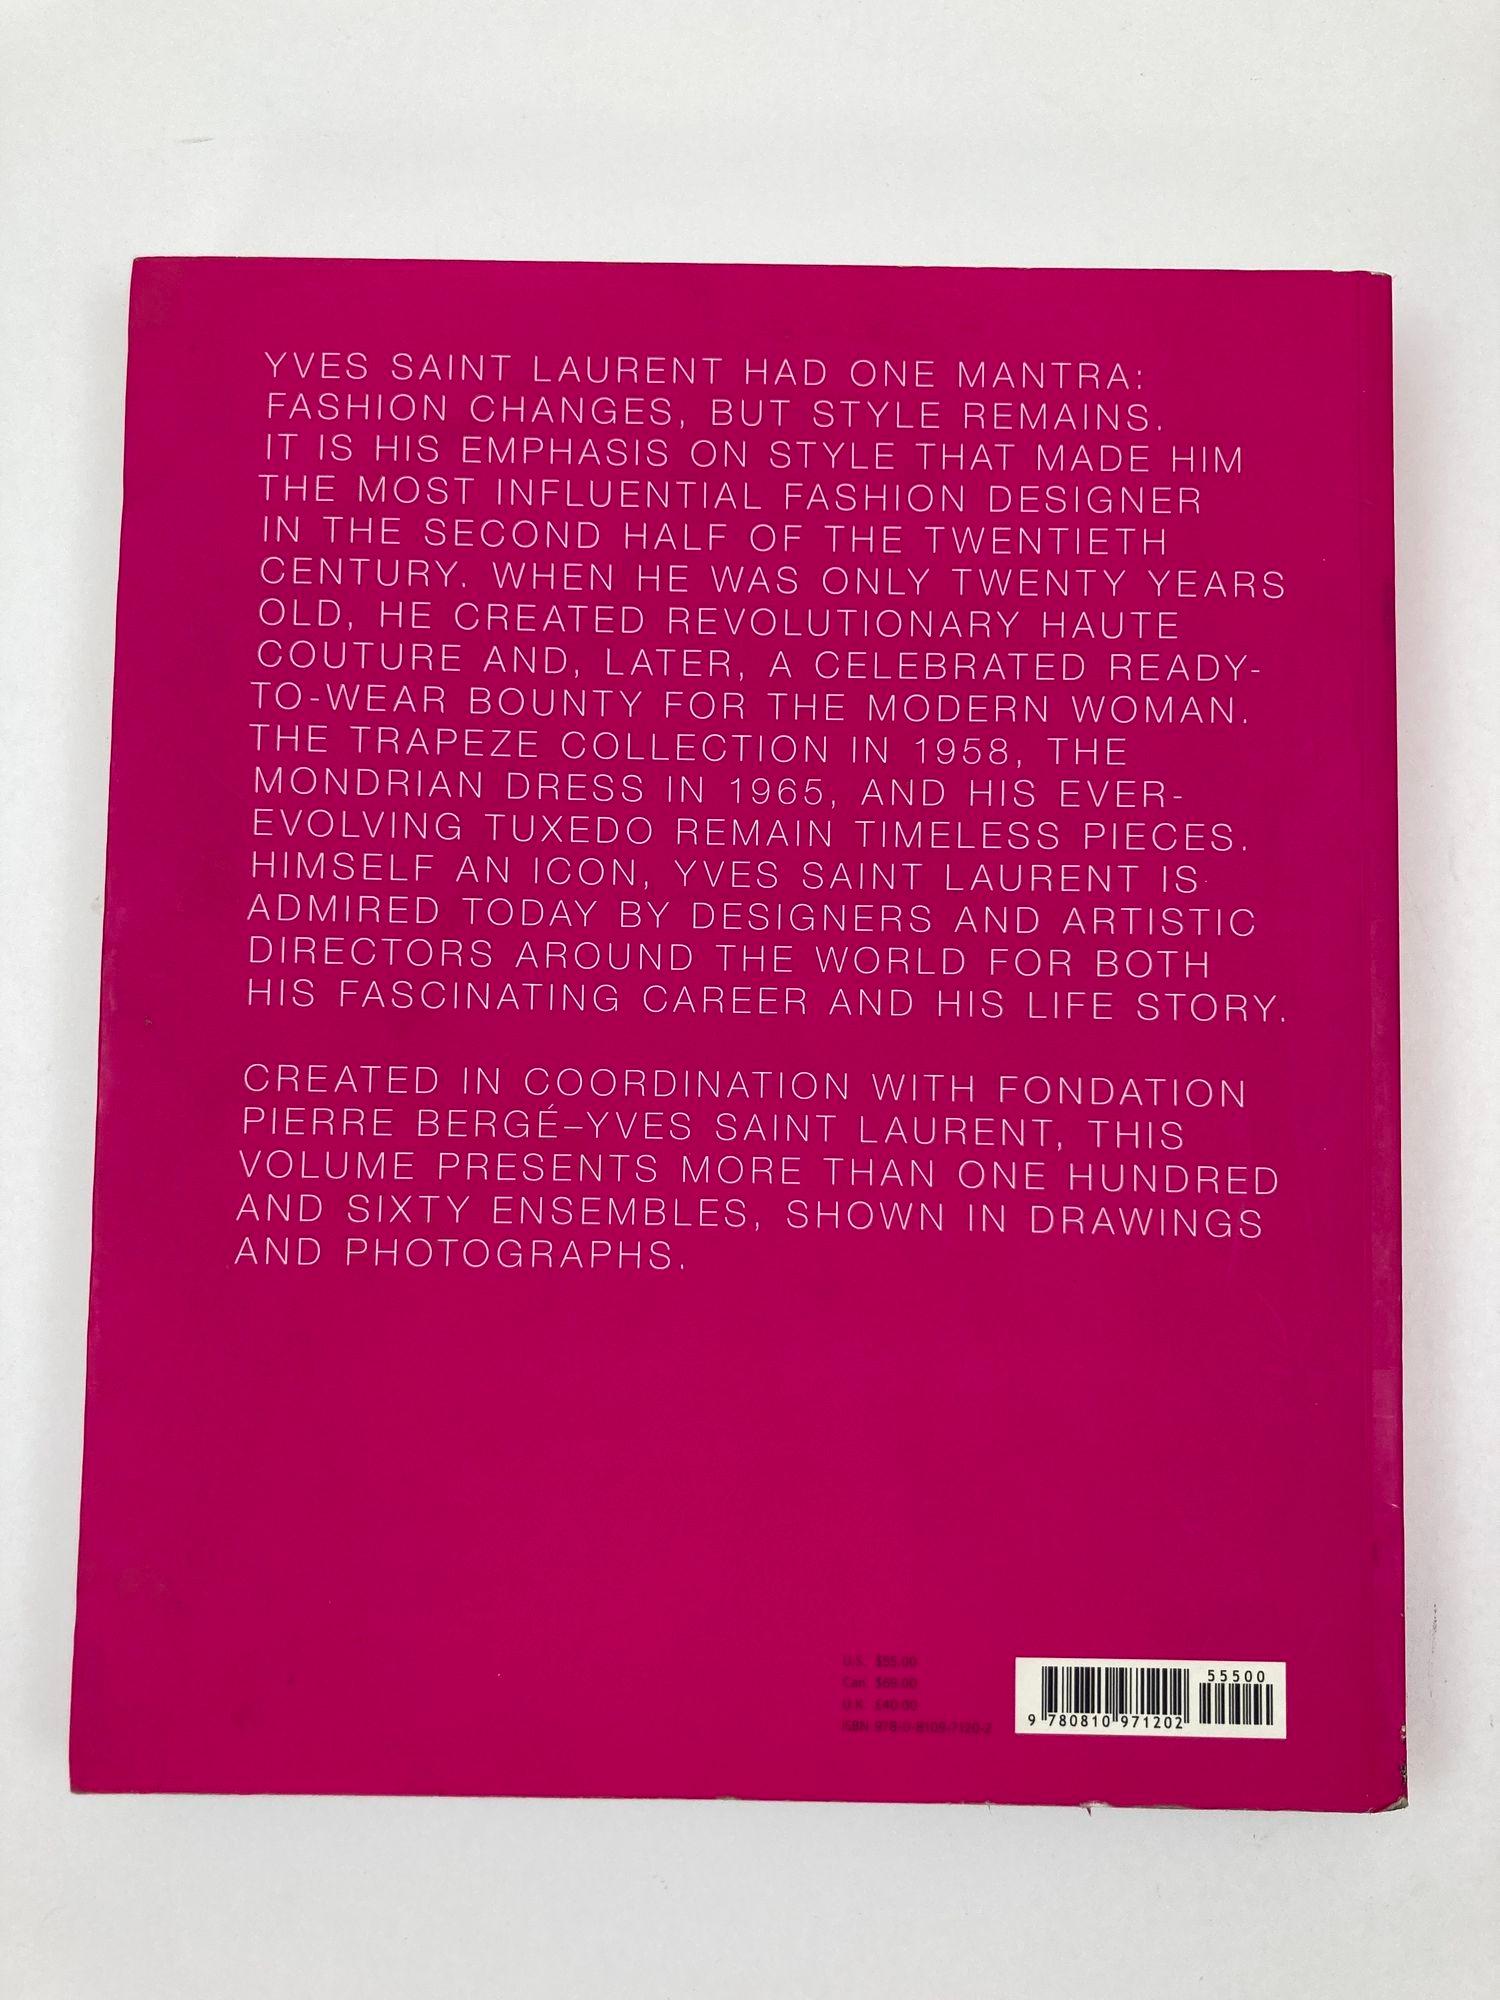 French Yves Saint Laurent Style Paperback 2008 Pink book by Foundation Pierre Berge For Sale